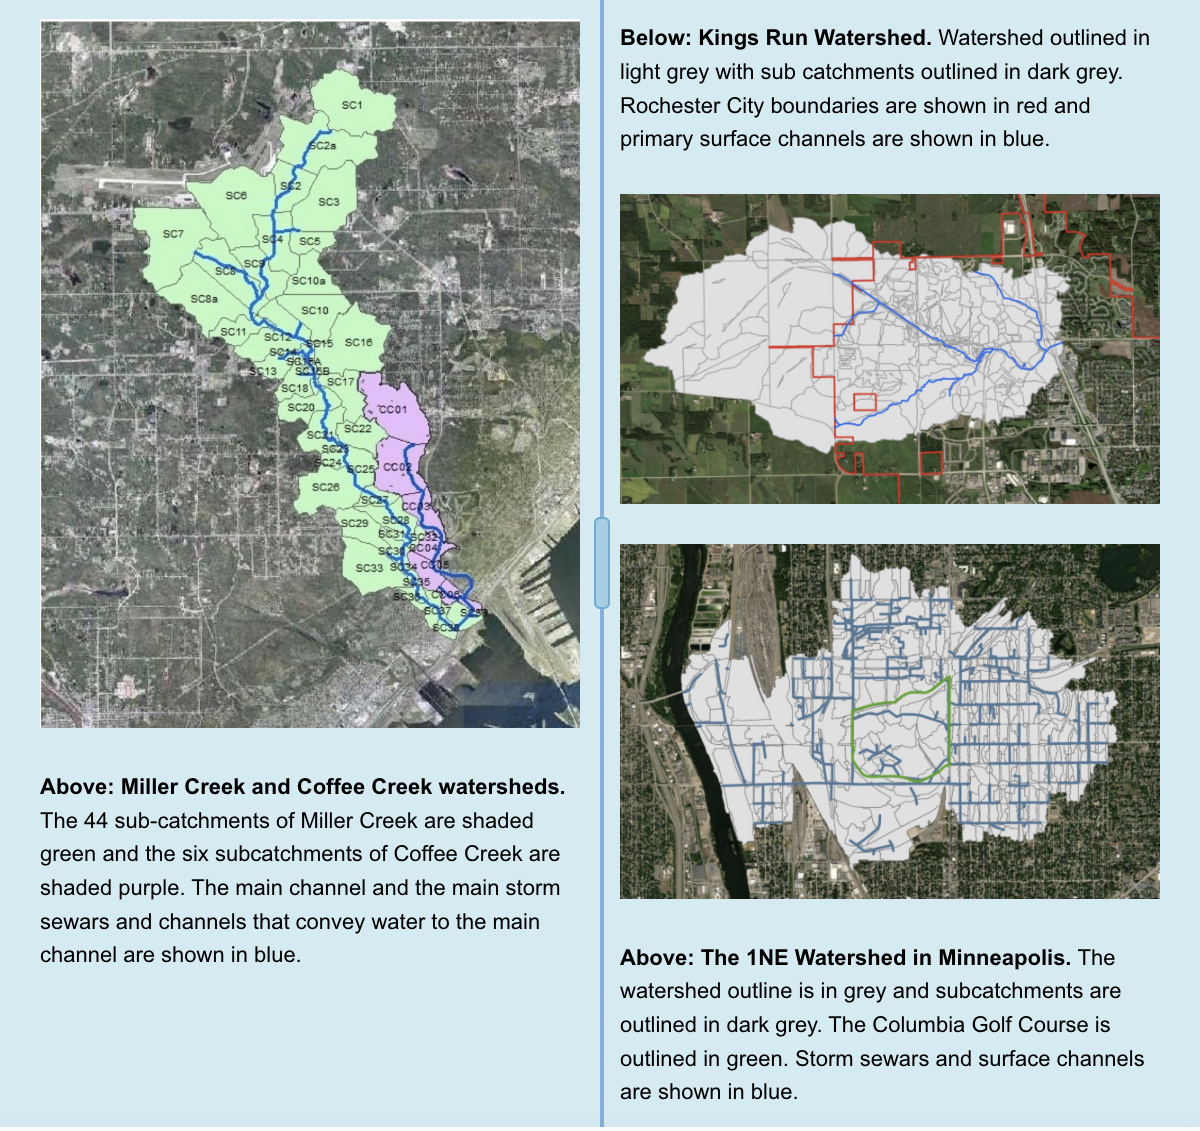 maps of three watershed districts featured in the article